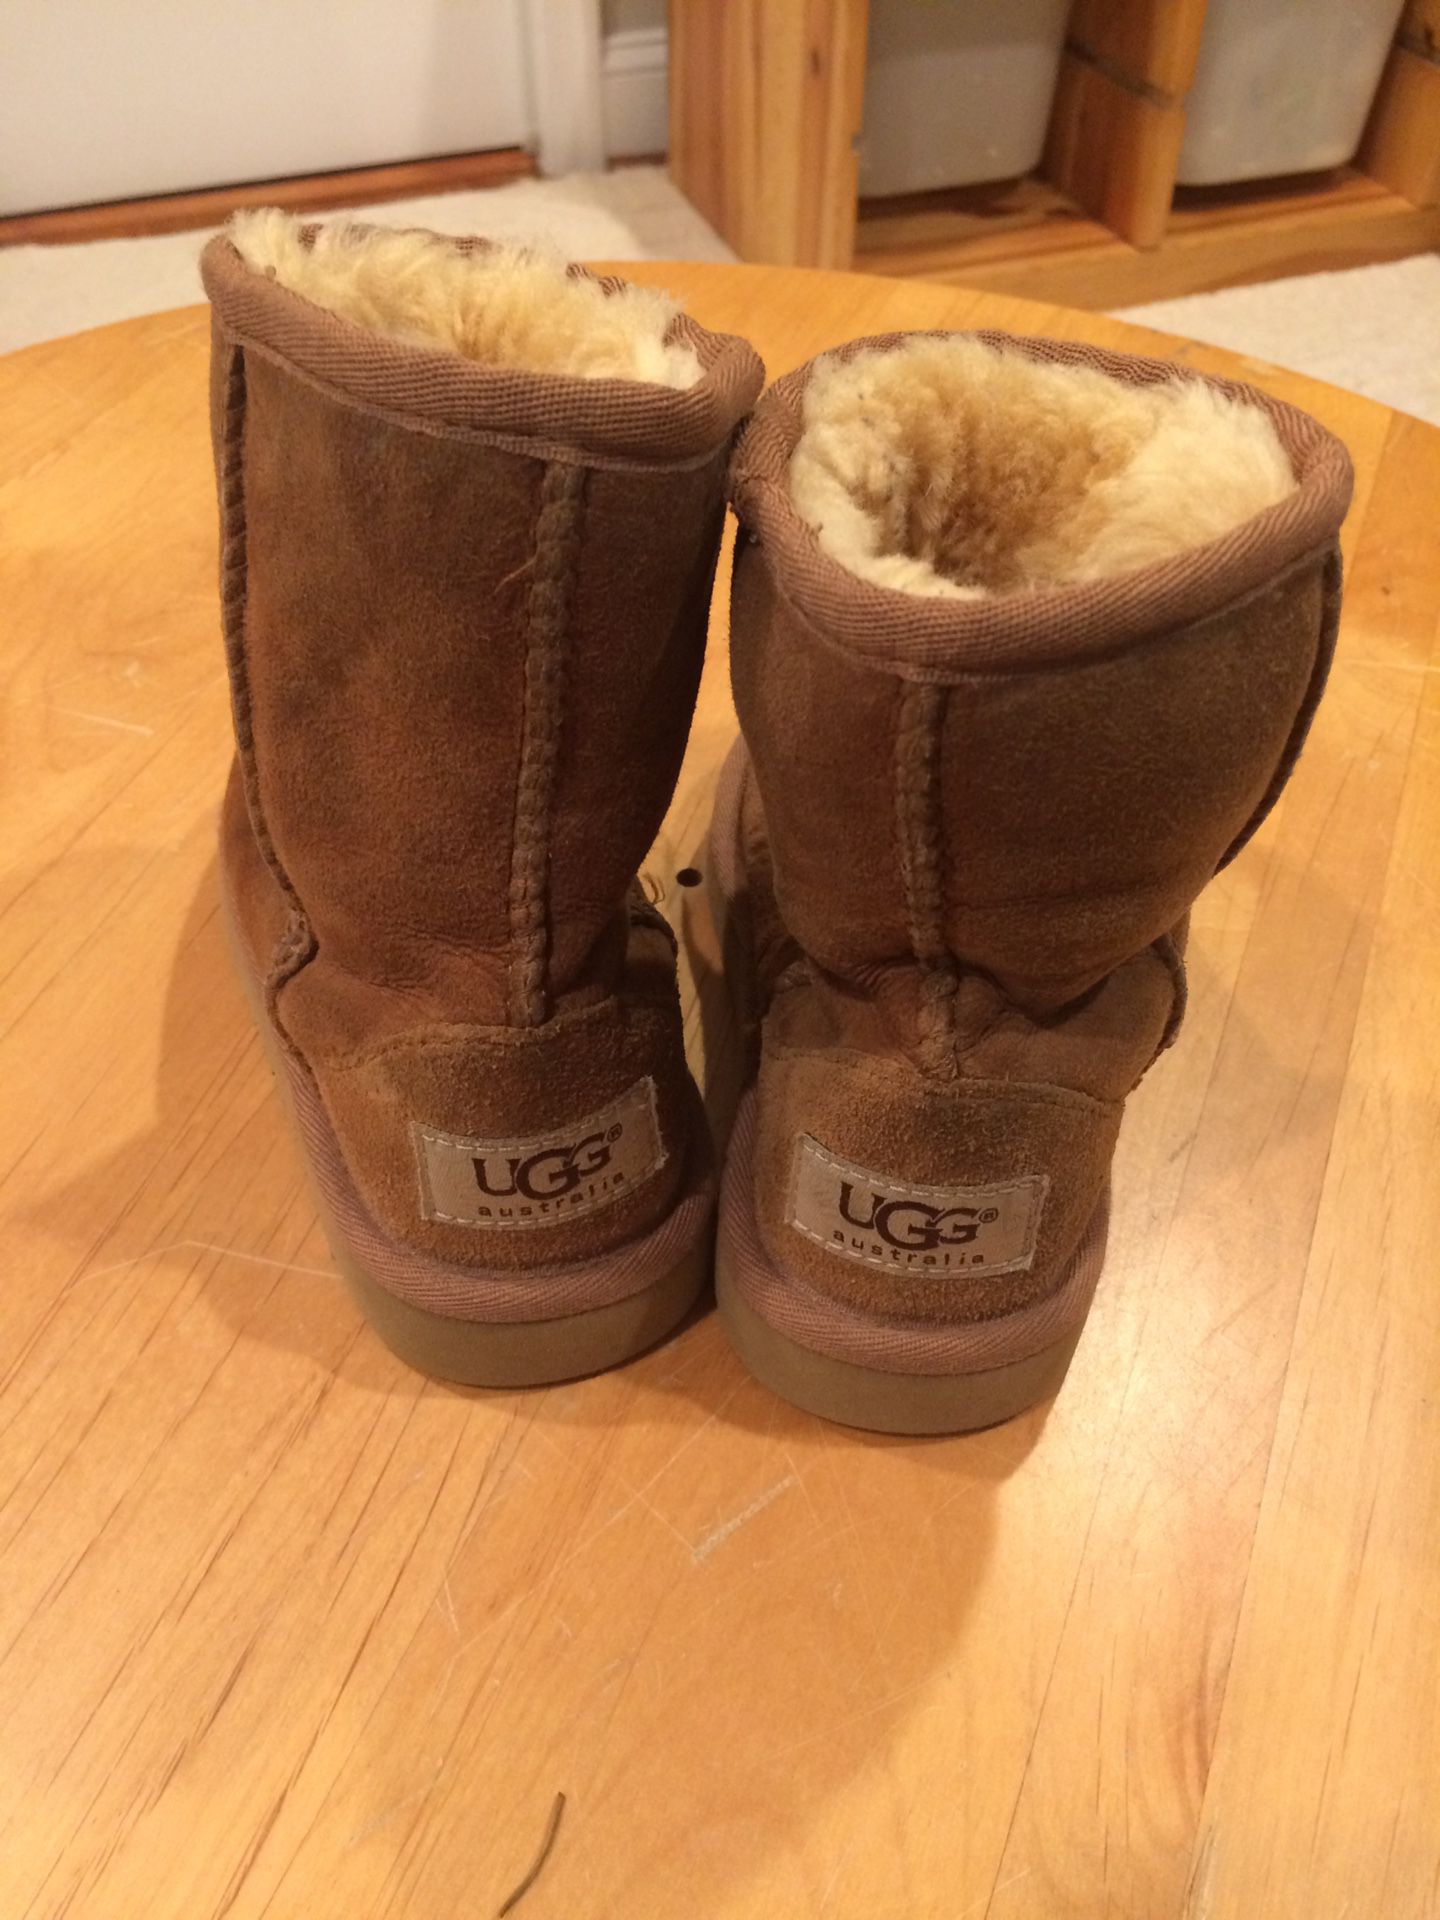 UGG Boots - Toddler Size 8